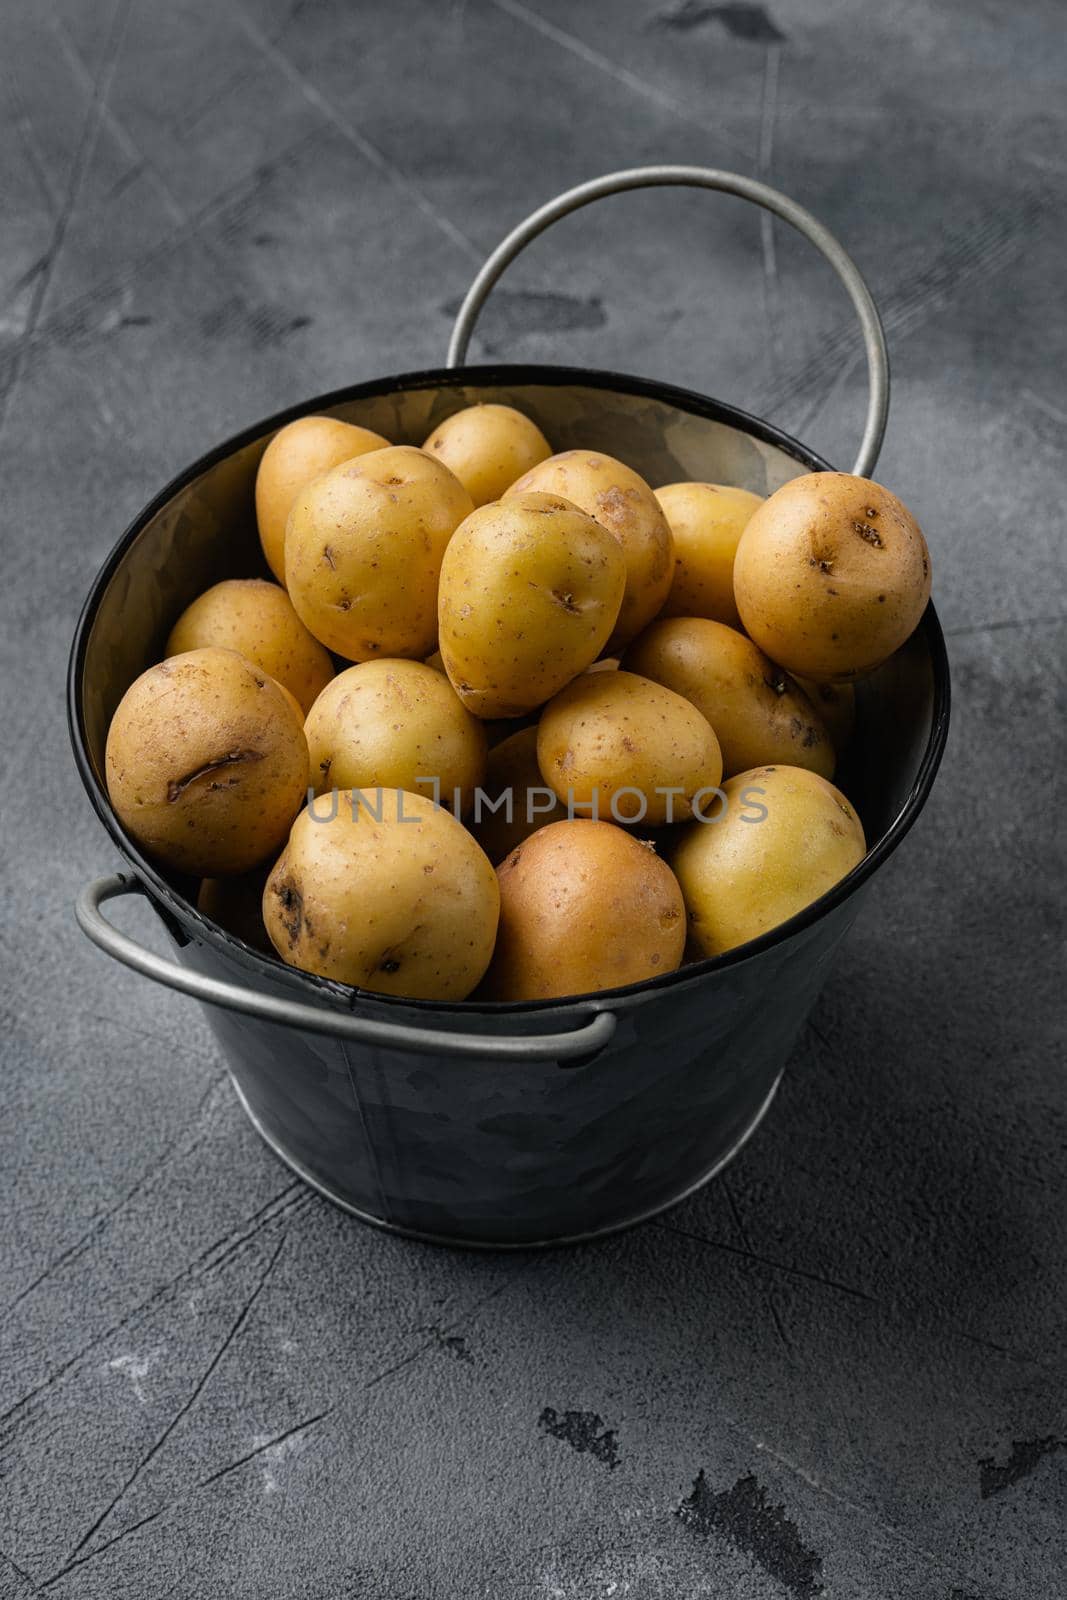 Organic White Baby Potatoes, on gray stone table background, with copy space for text by Ilianesolenyi